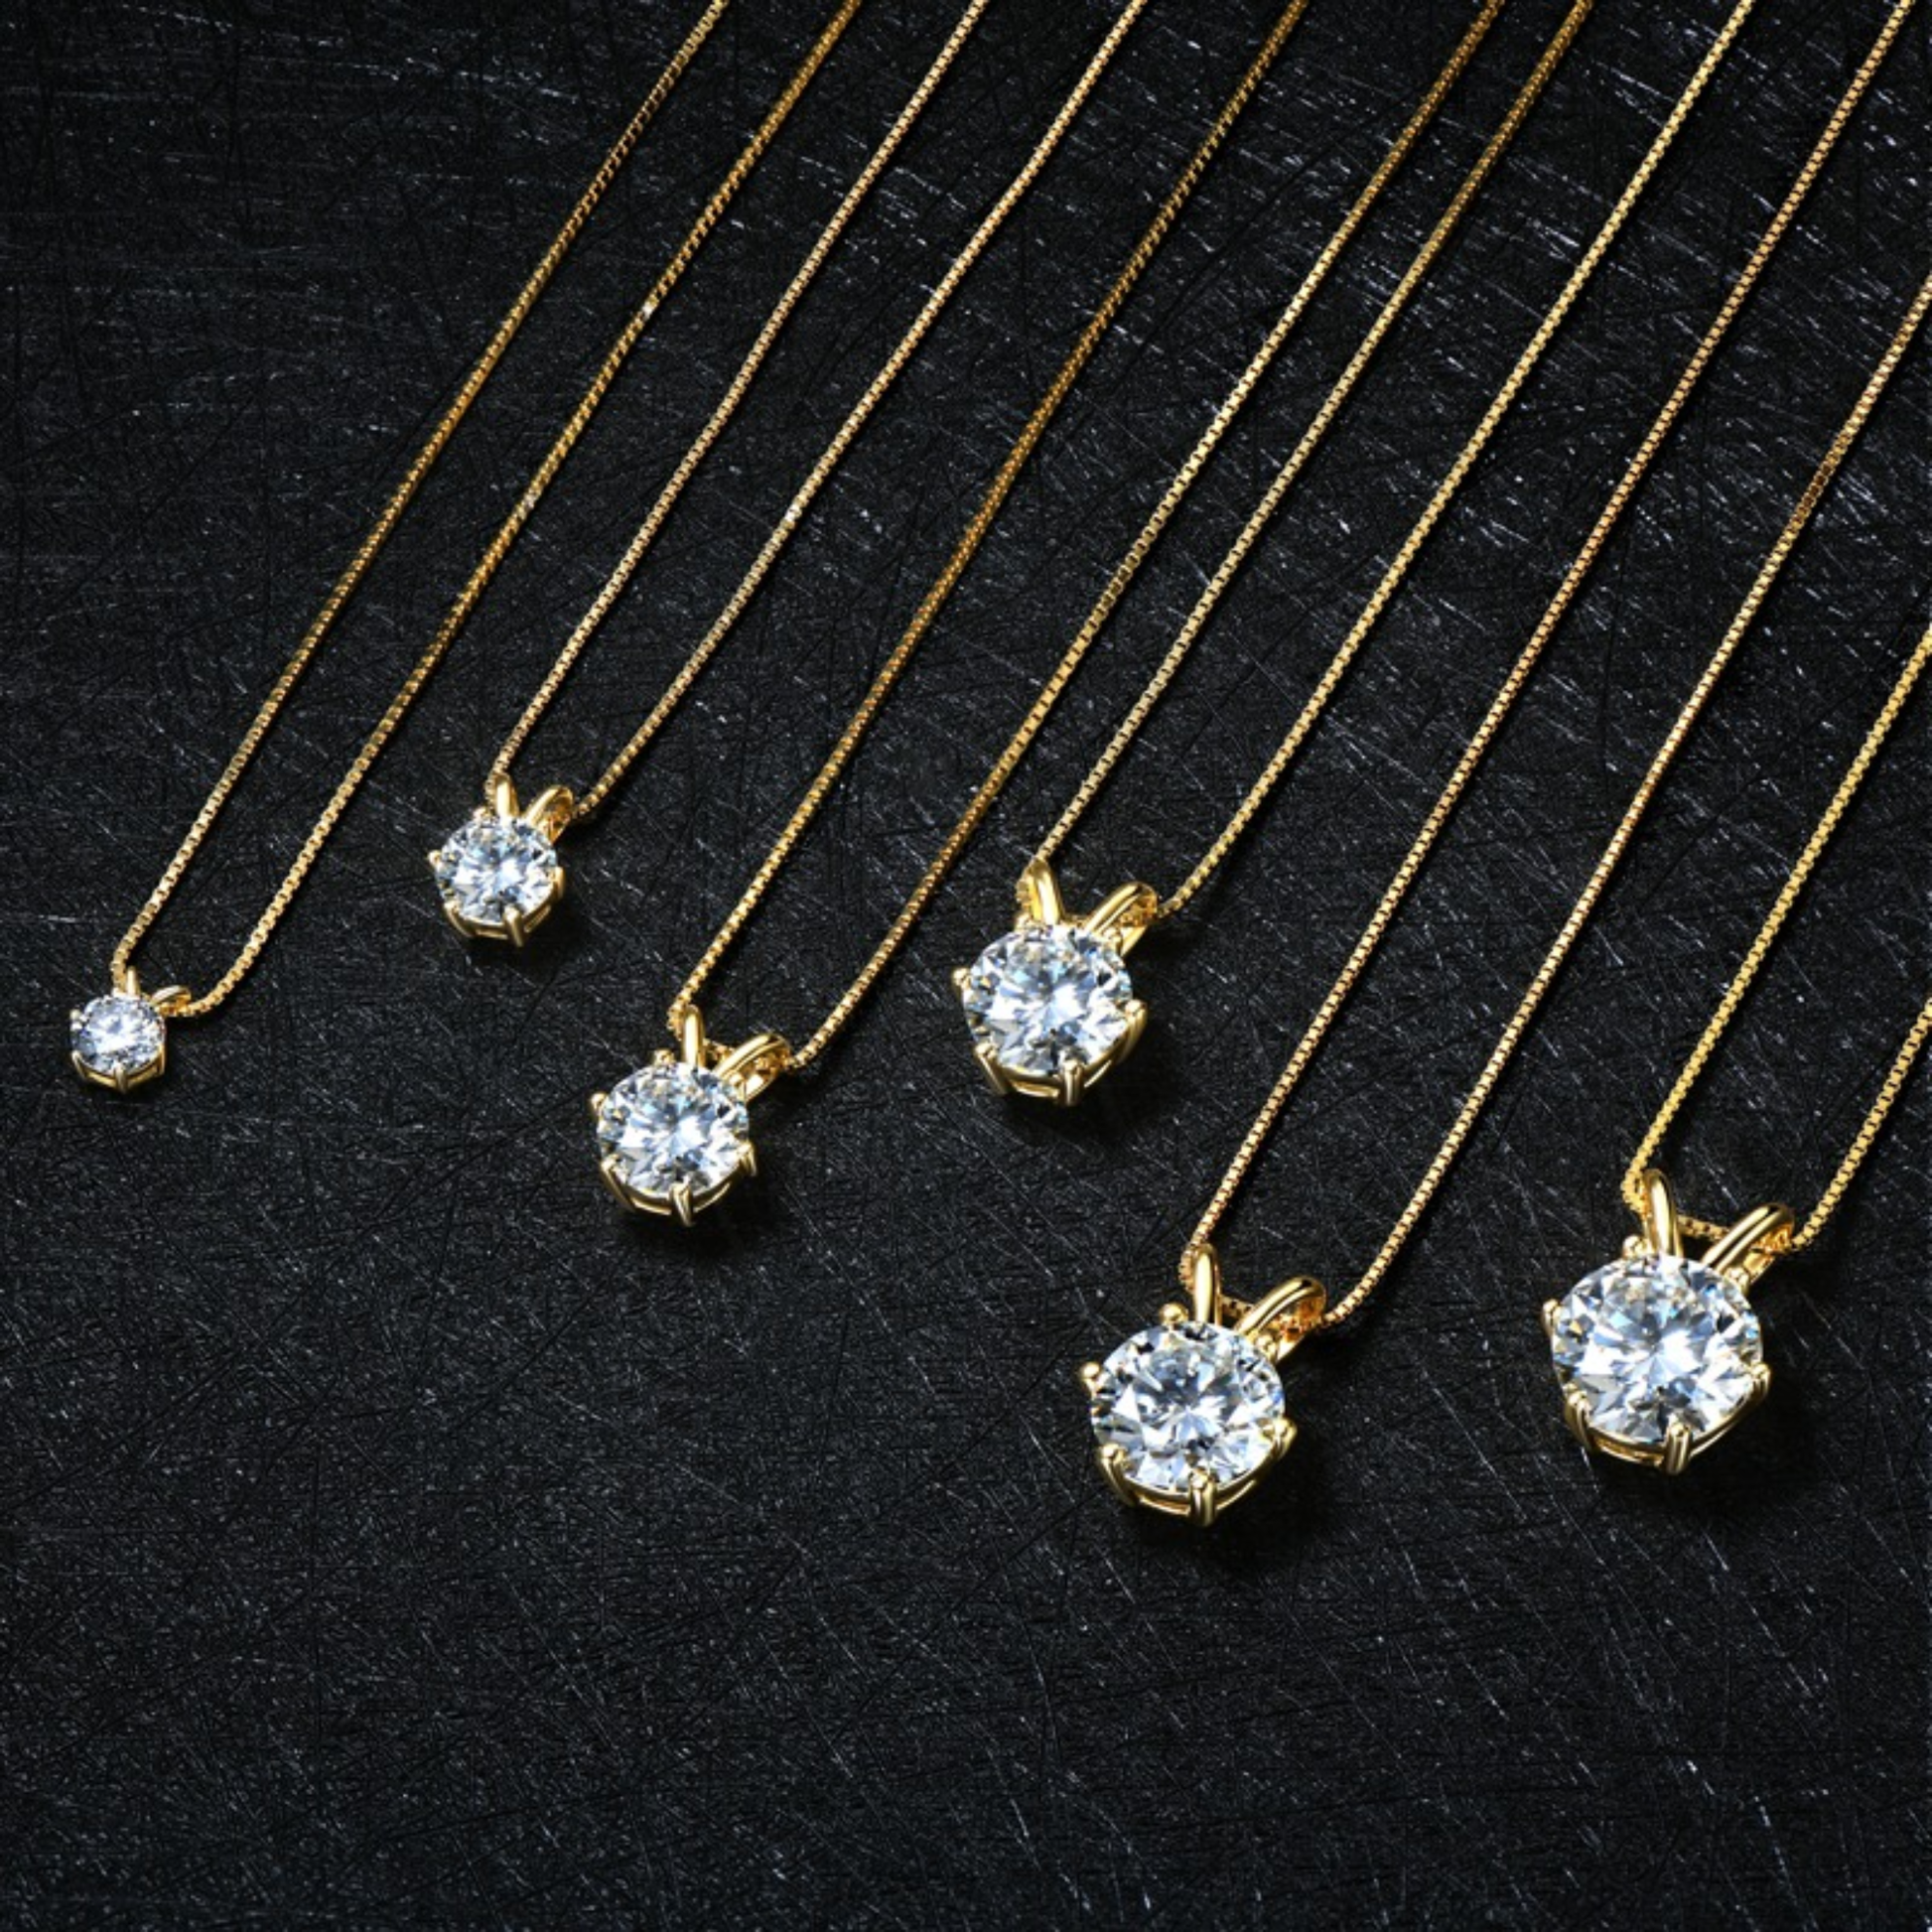 Moissanite Pendant Necklace - Gold Plated 925 Sterling Silver - www.gemmacraft.com